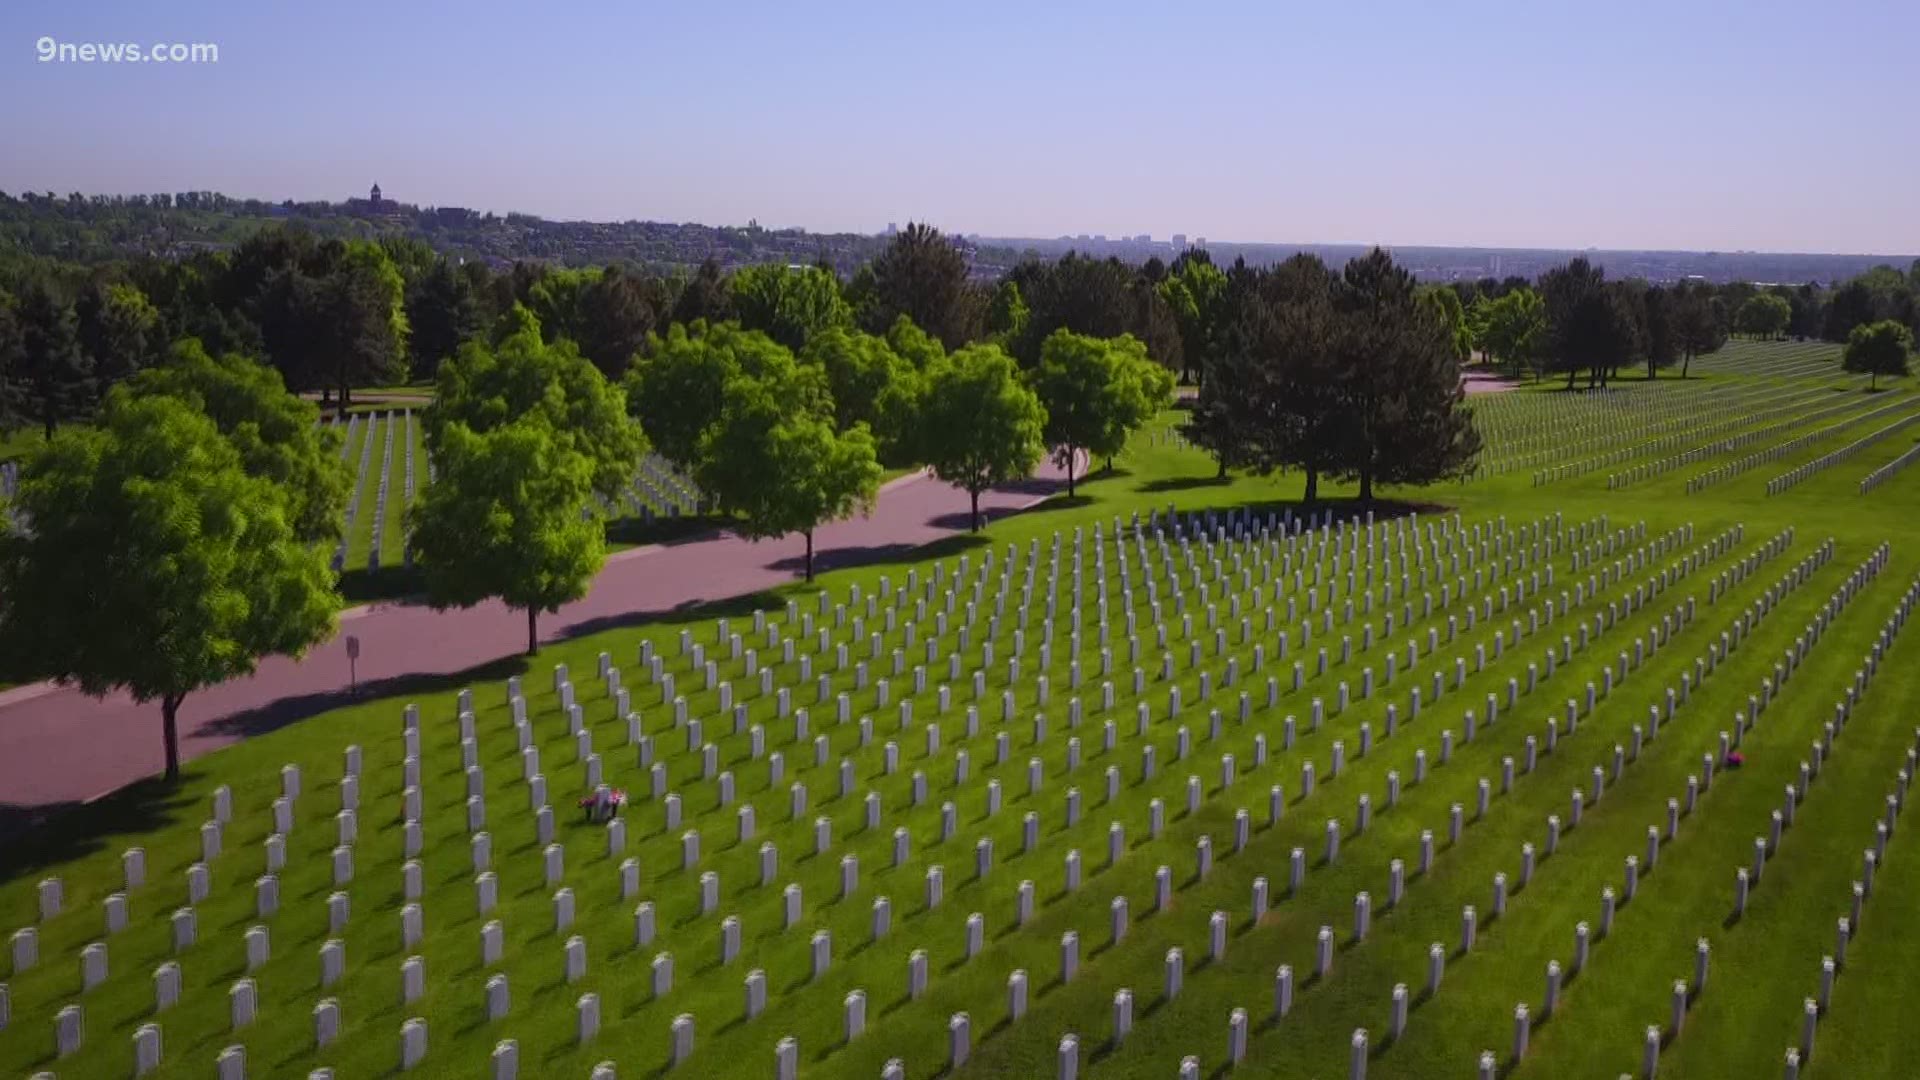 Stories Behind the Stars is trying to digitize the experiences of more 400,000 soldiers who lost their life or disappeared in World War II.